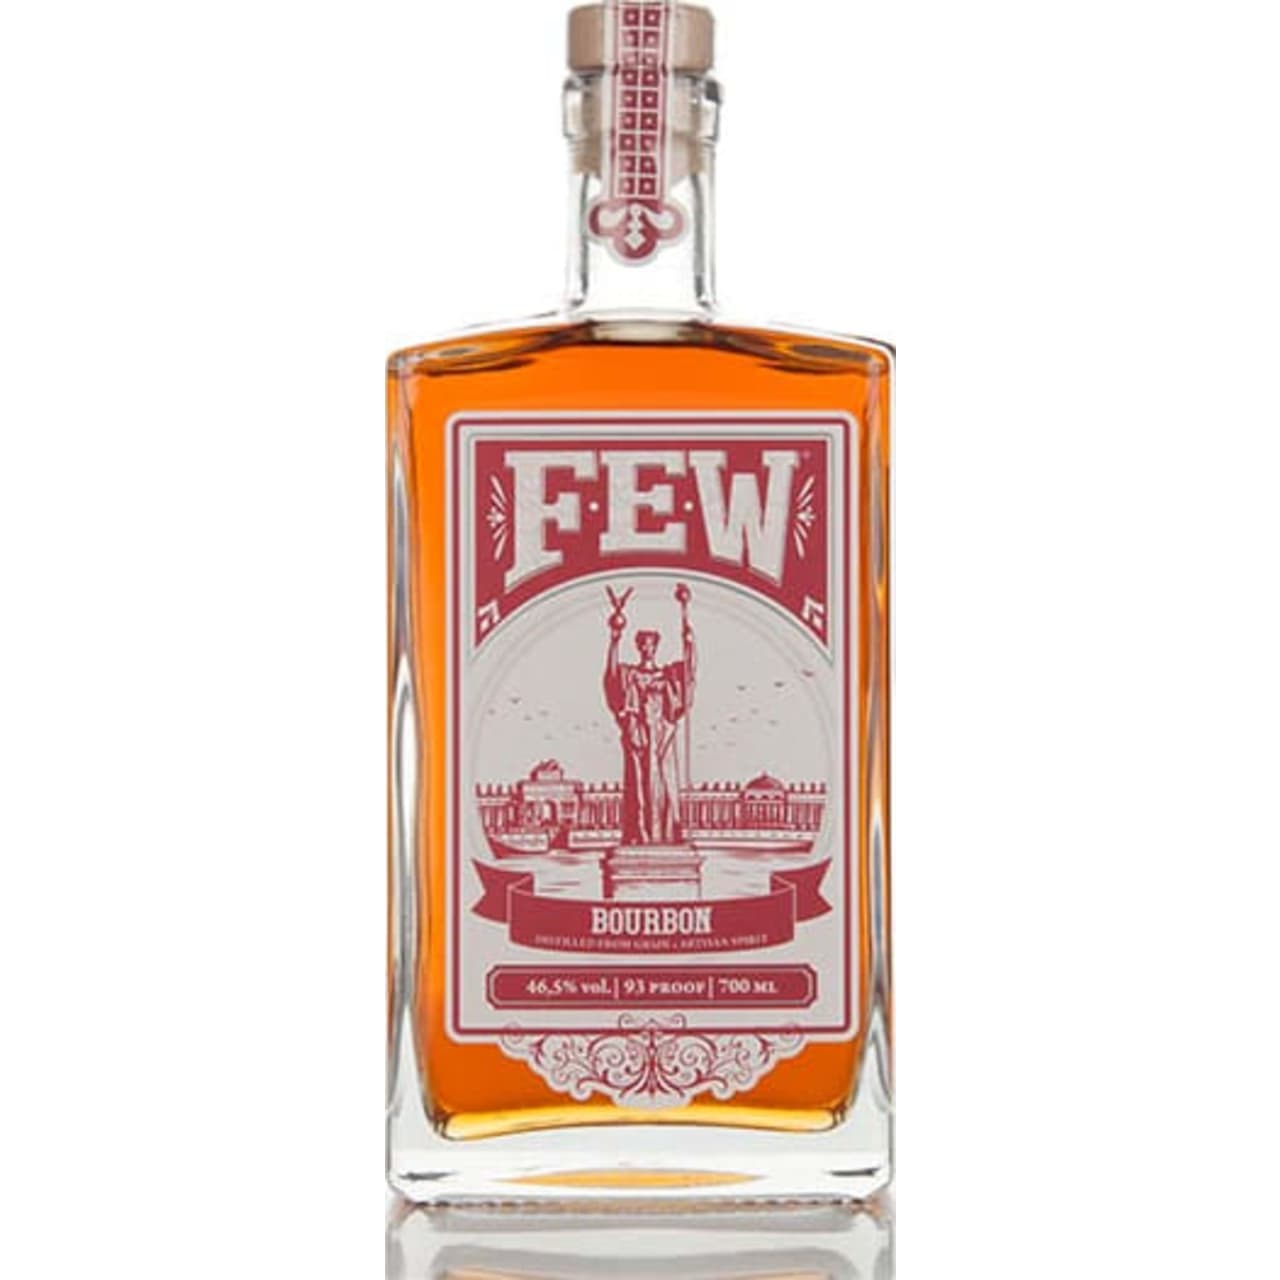 This small batch bourbon, hand-crafted in charred oak barrels, uses a three-grain spirit recipe that infuses southern tradition with the spiciness of northern rye and a touch of malt for smoothness.